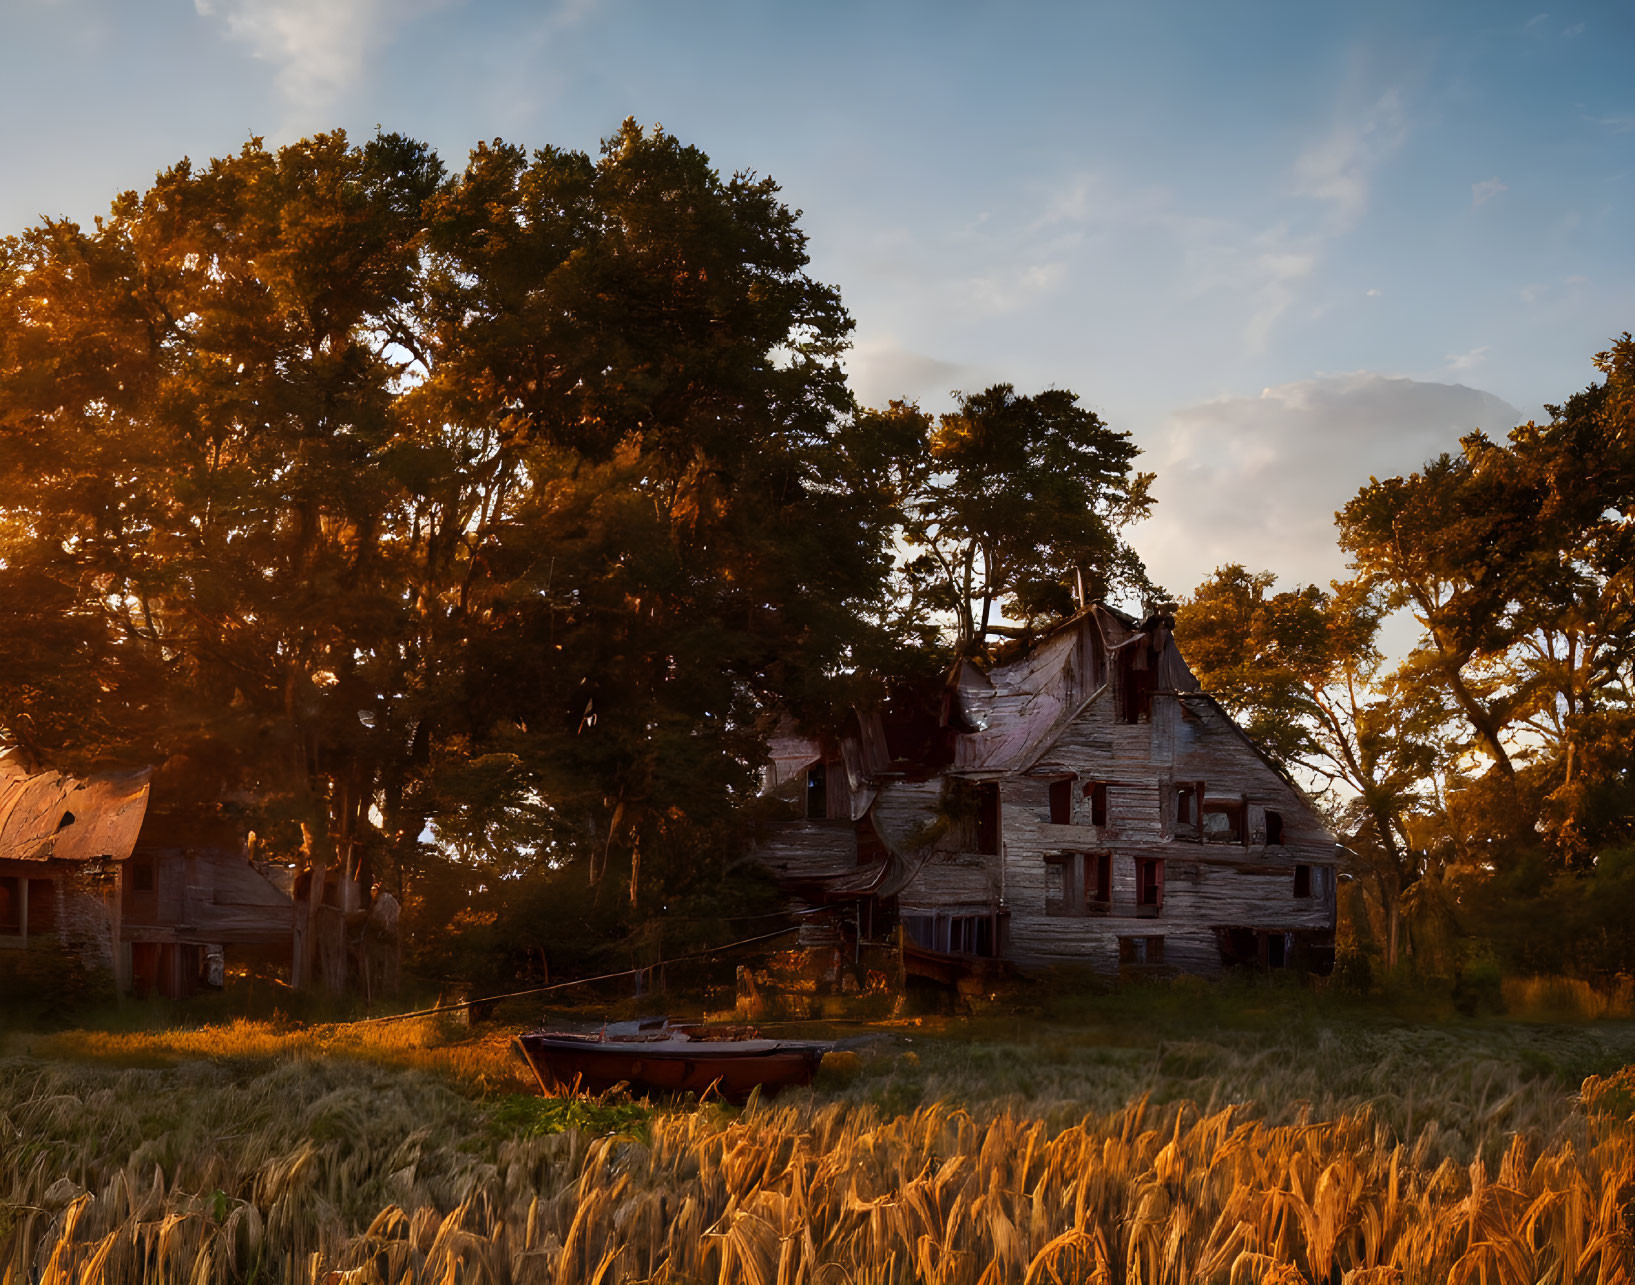 Abandoned wooden house in forest with rusty boat and wheat field at sunset